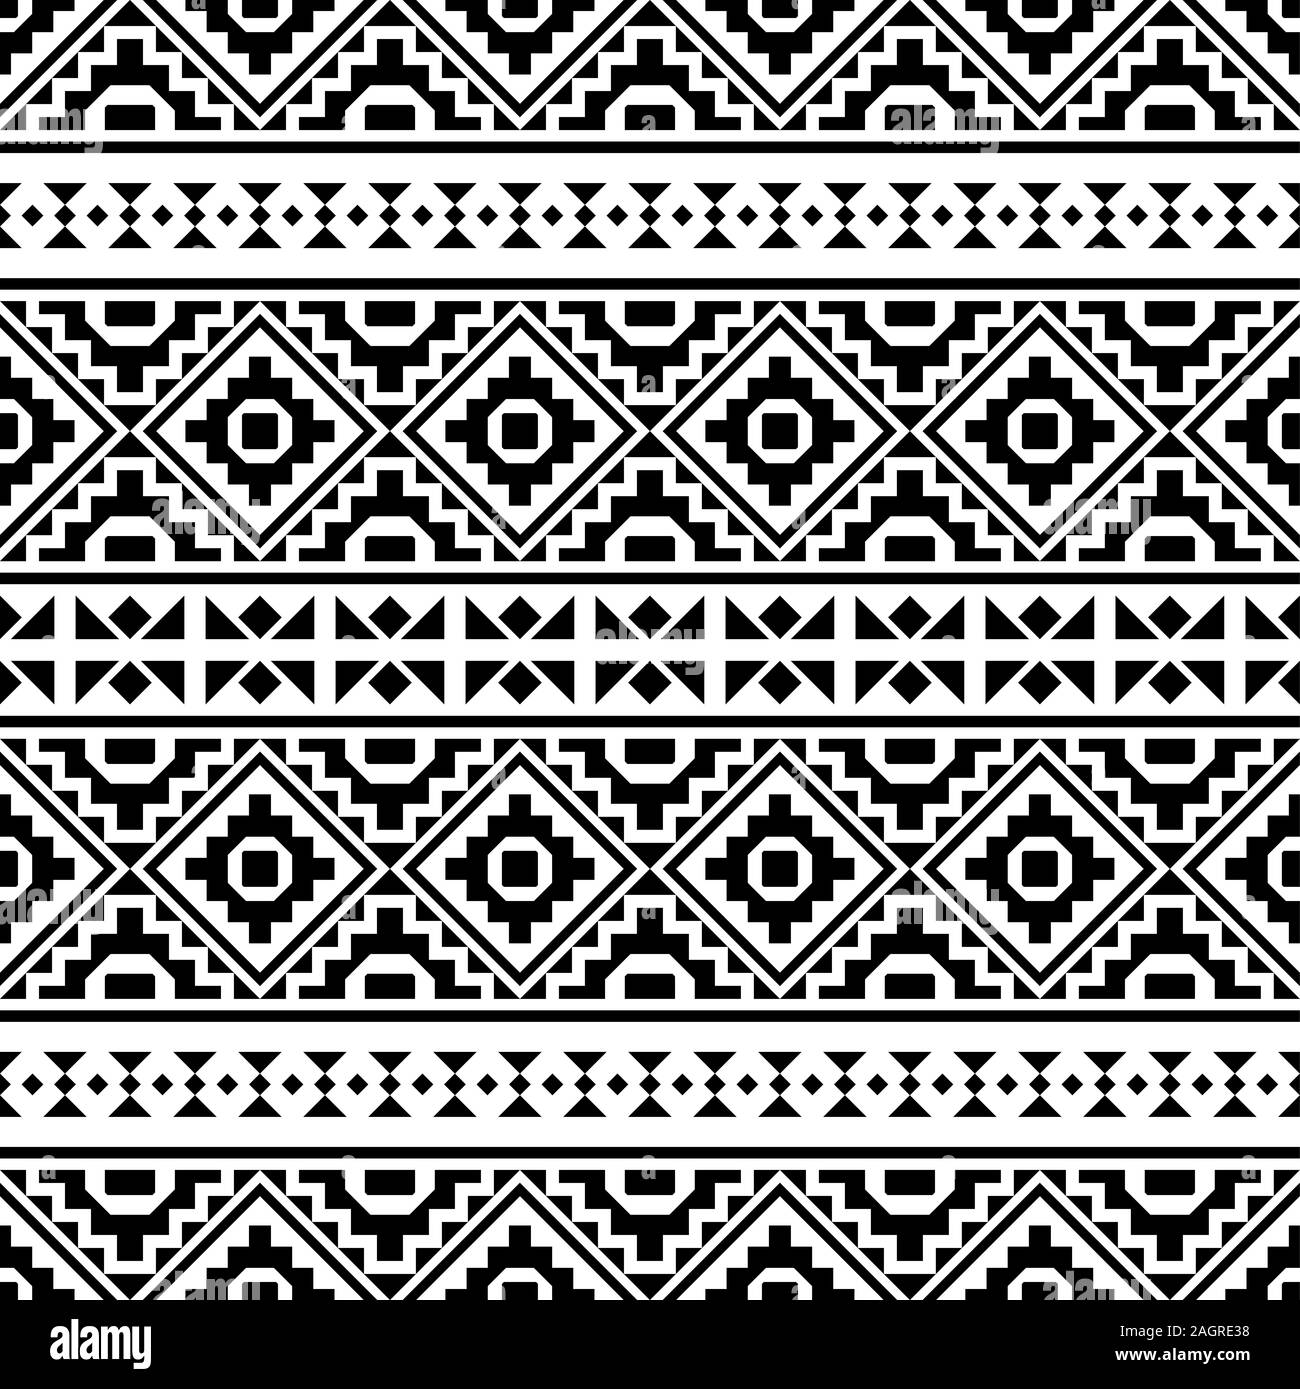 Geometric Tribal Ethnic Pattern Design in black and white color Stock ...